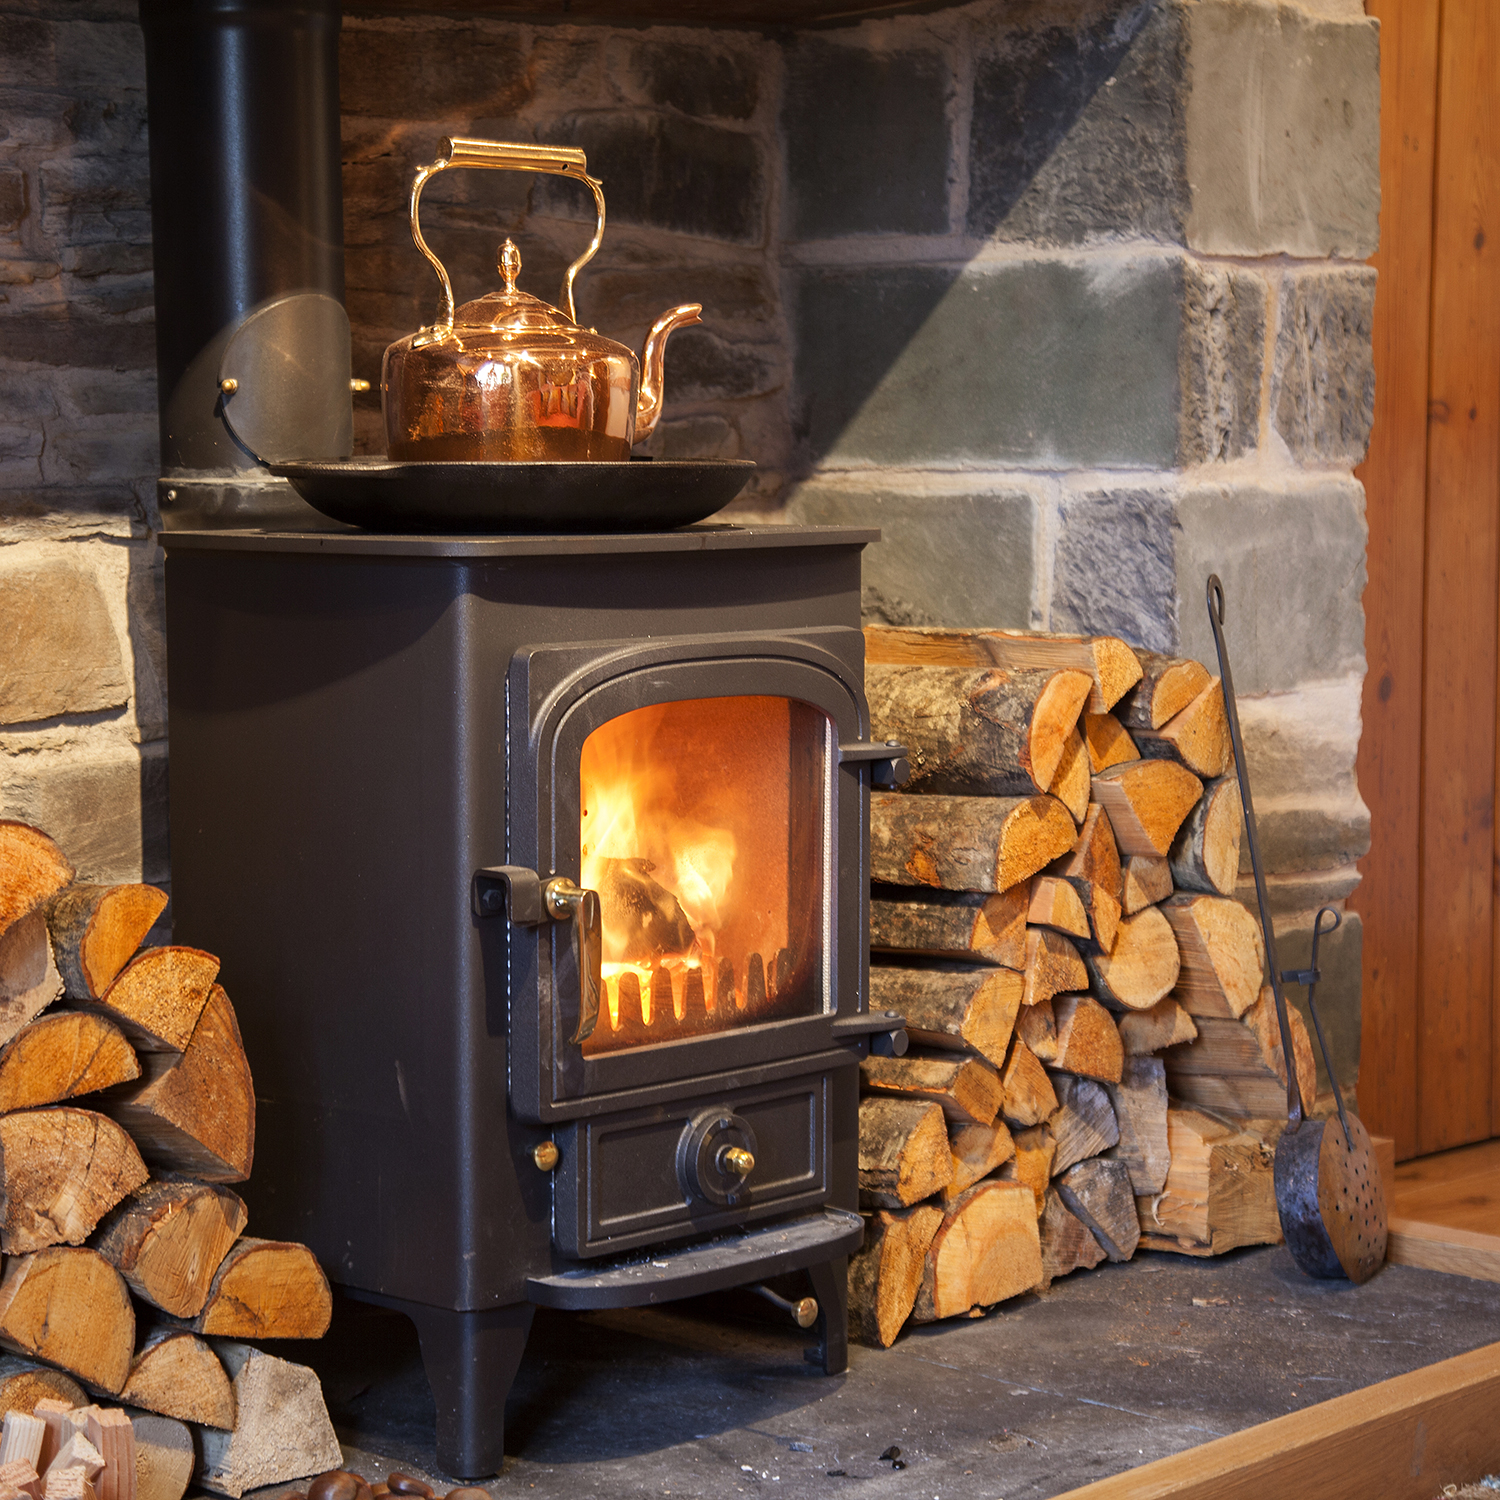 A new woodburning stove was installed within the stone fireplace.